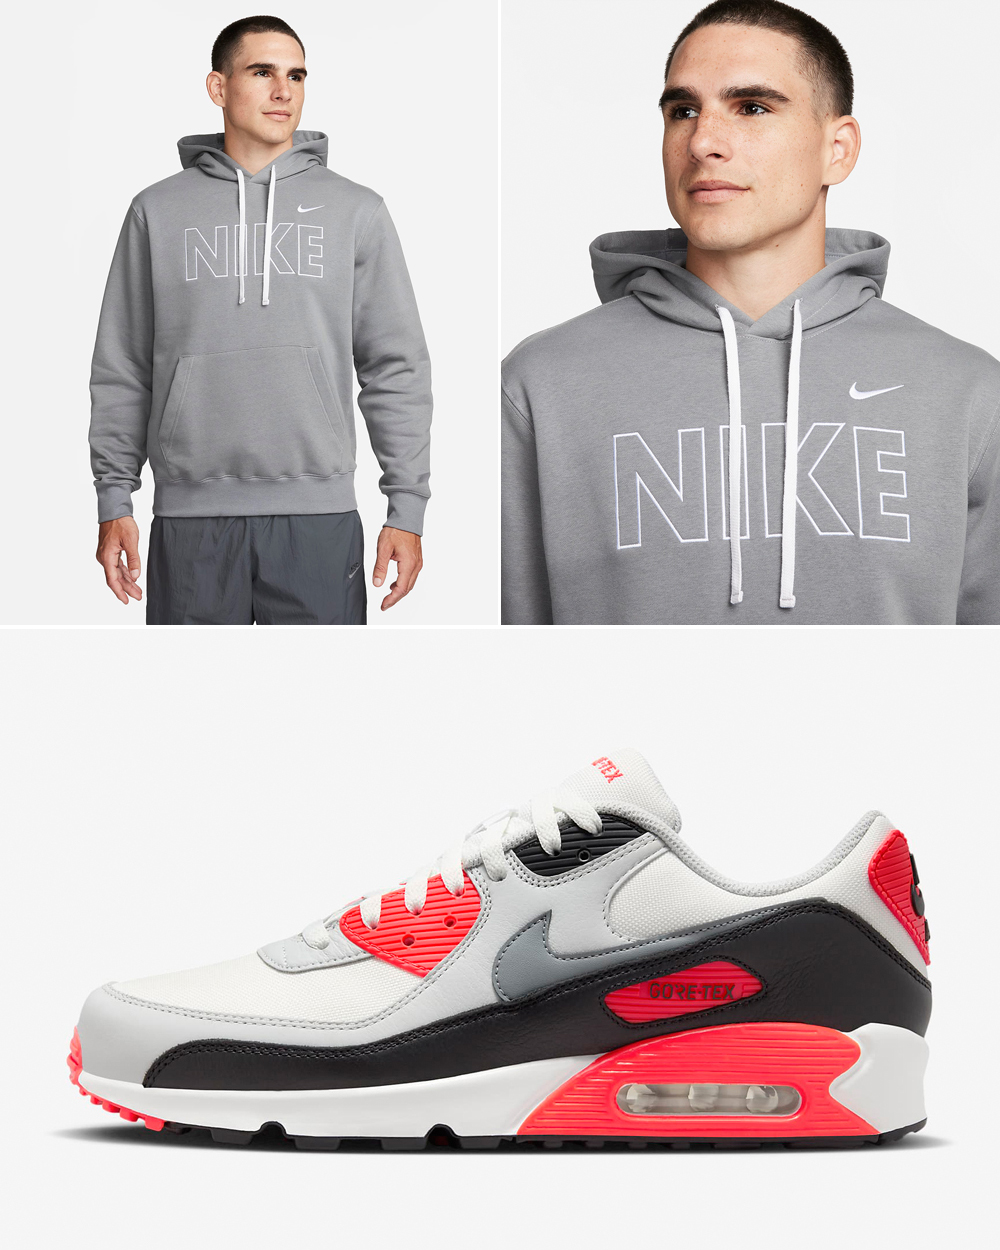 Nike-Air-Max-90-Gore-Tex-Infrared-Hoodie-Matching-Outfit